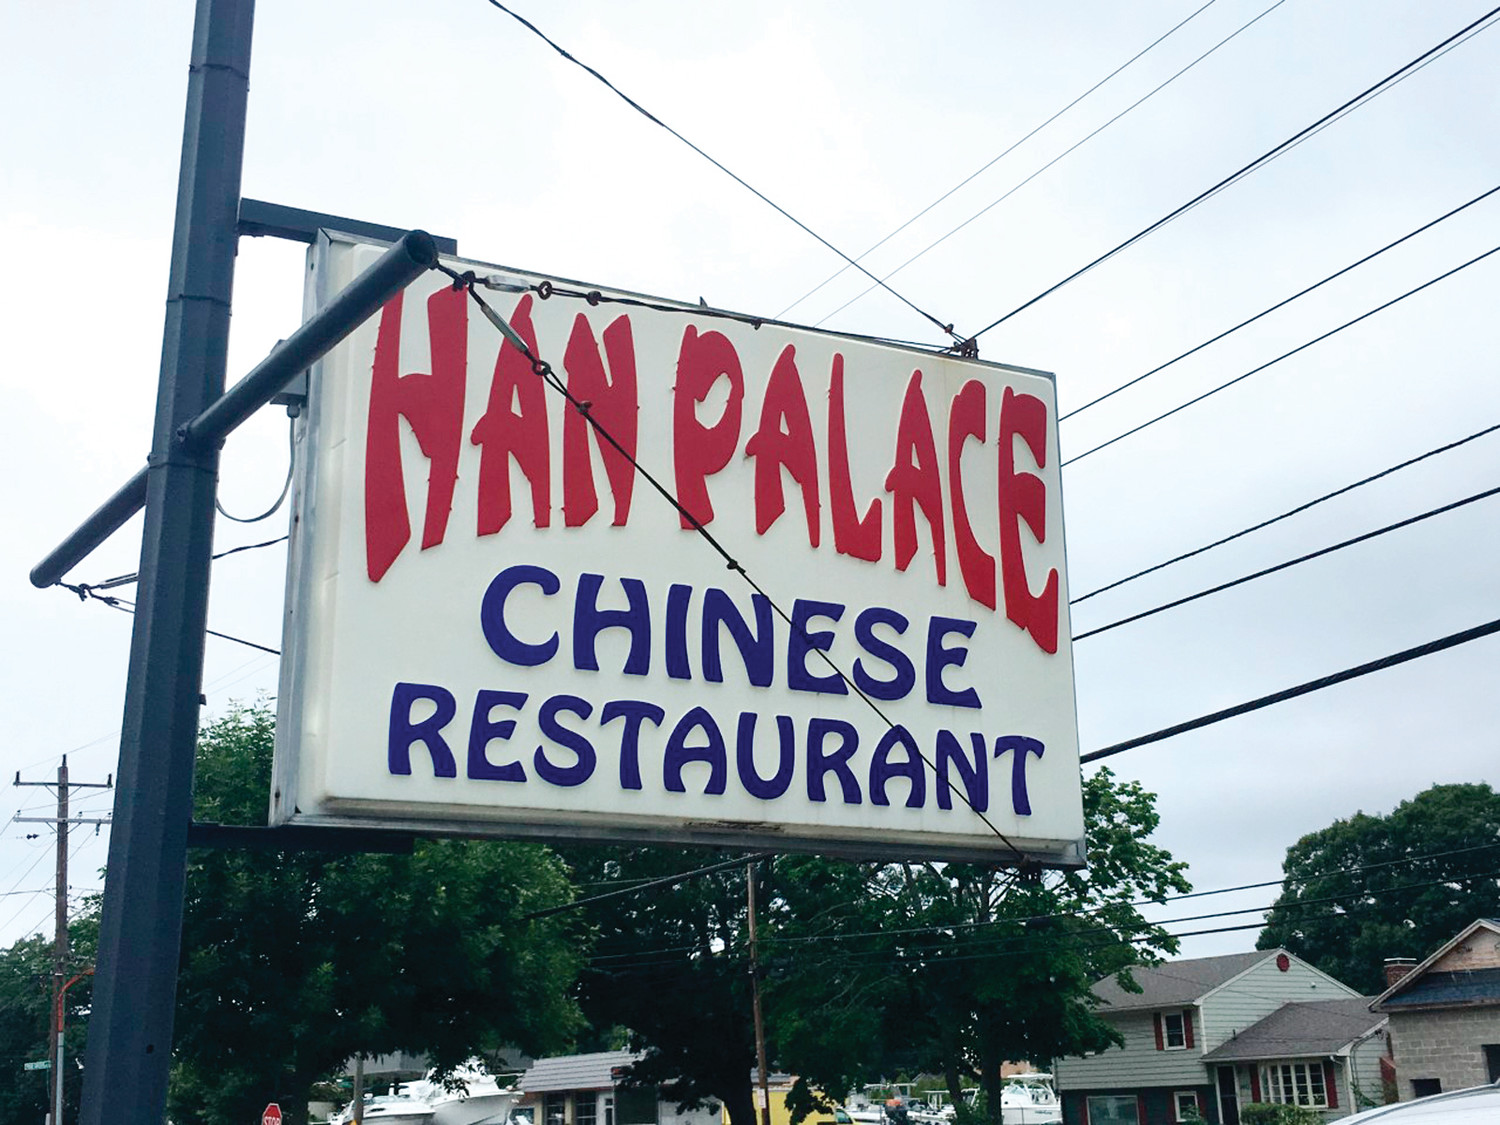 If you have lived in Warwick for at least 34 years, then you have seen this longstanding restaurant on West Shore Road, Han Palace.  This popular local favorite serves some of the best Chinese food in the city – come see and taste for yourself!